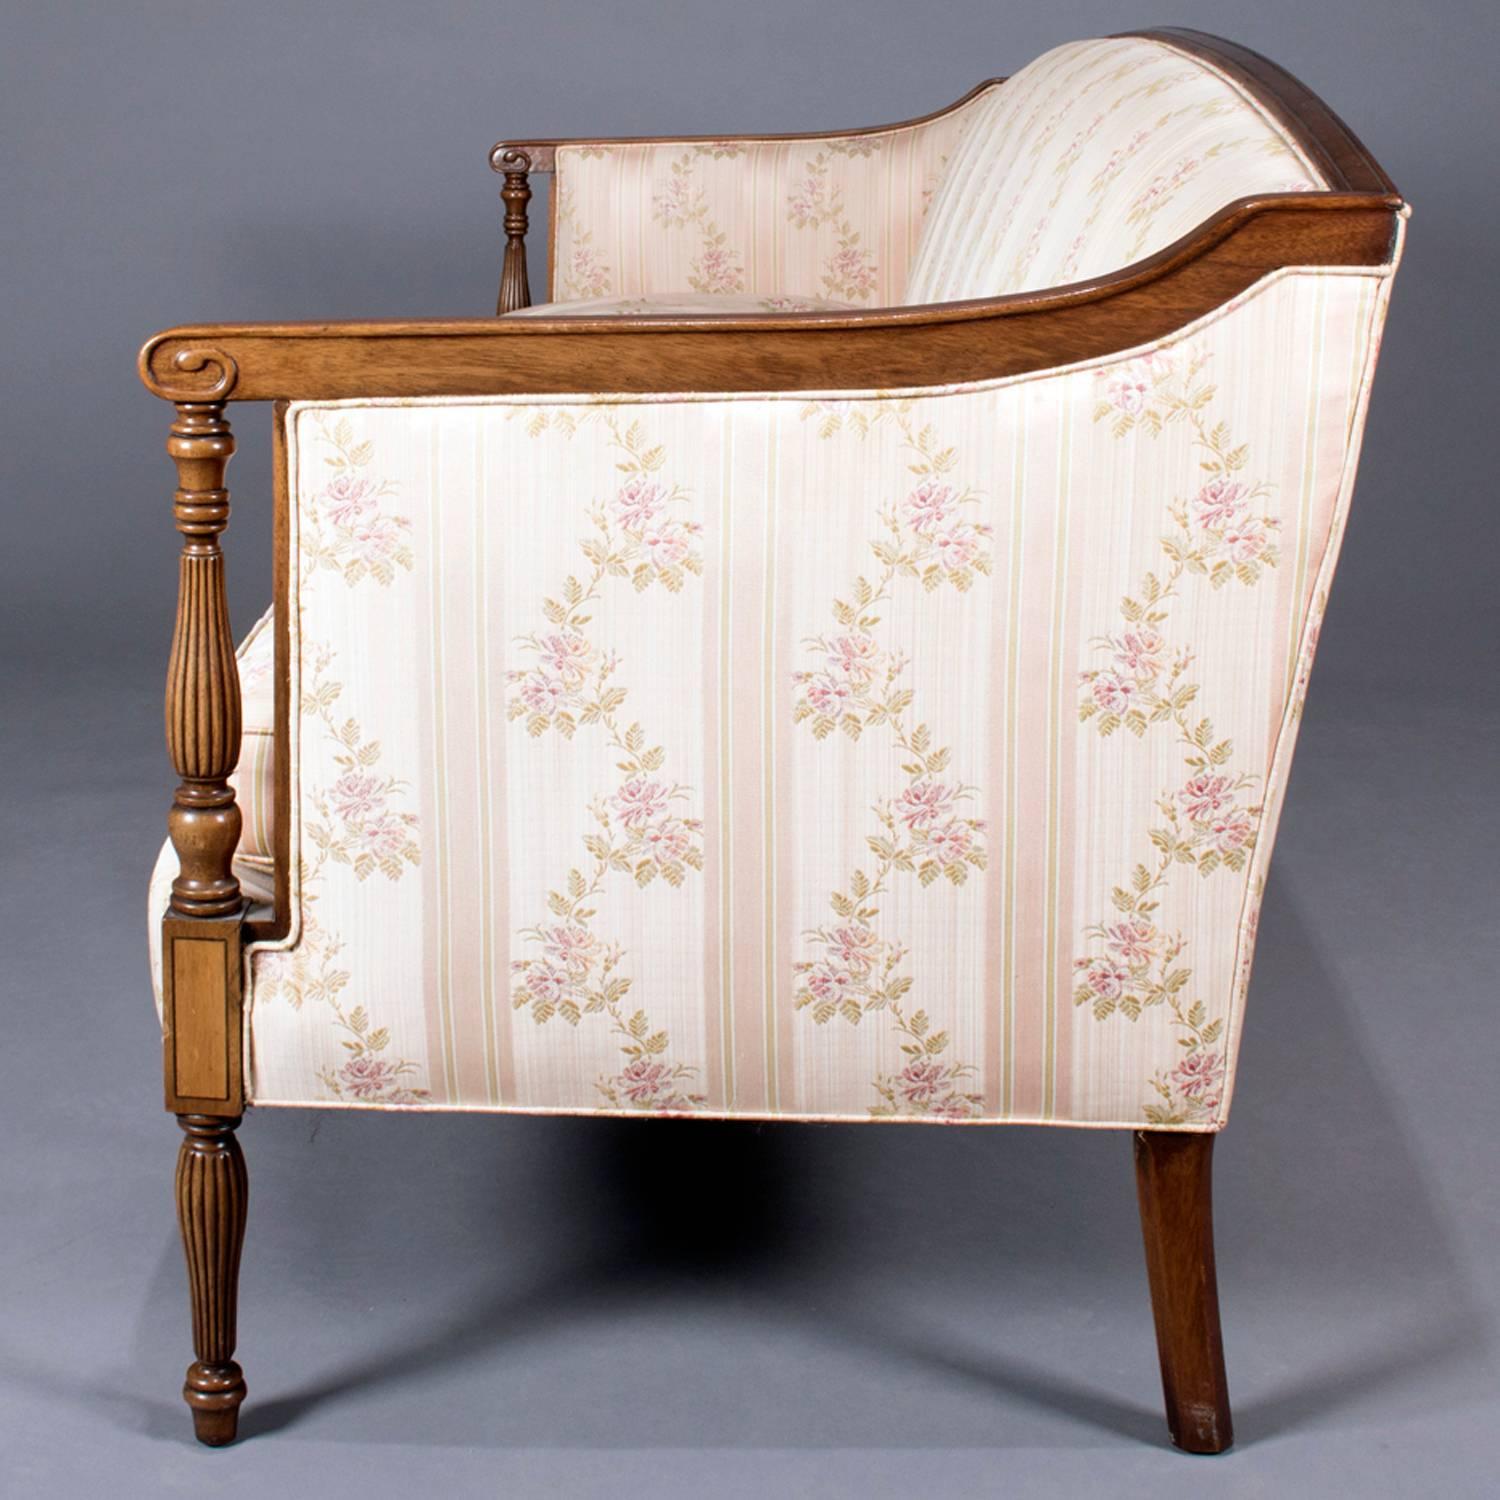 20th Century Sheraton Style Mahogany and Burl Upholstered Settee by W&J Sloan, circa 1930